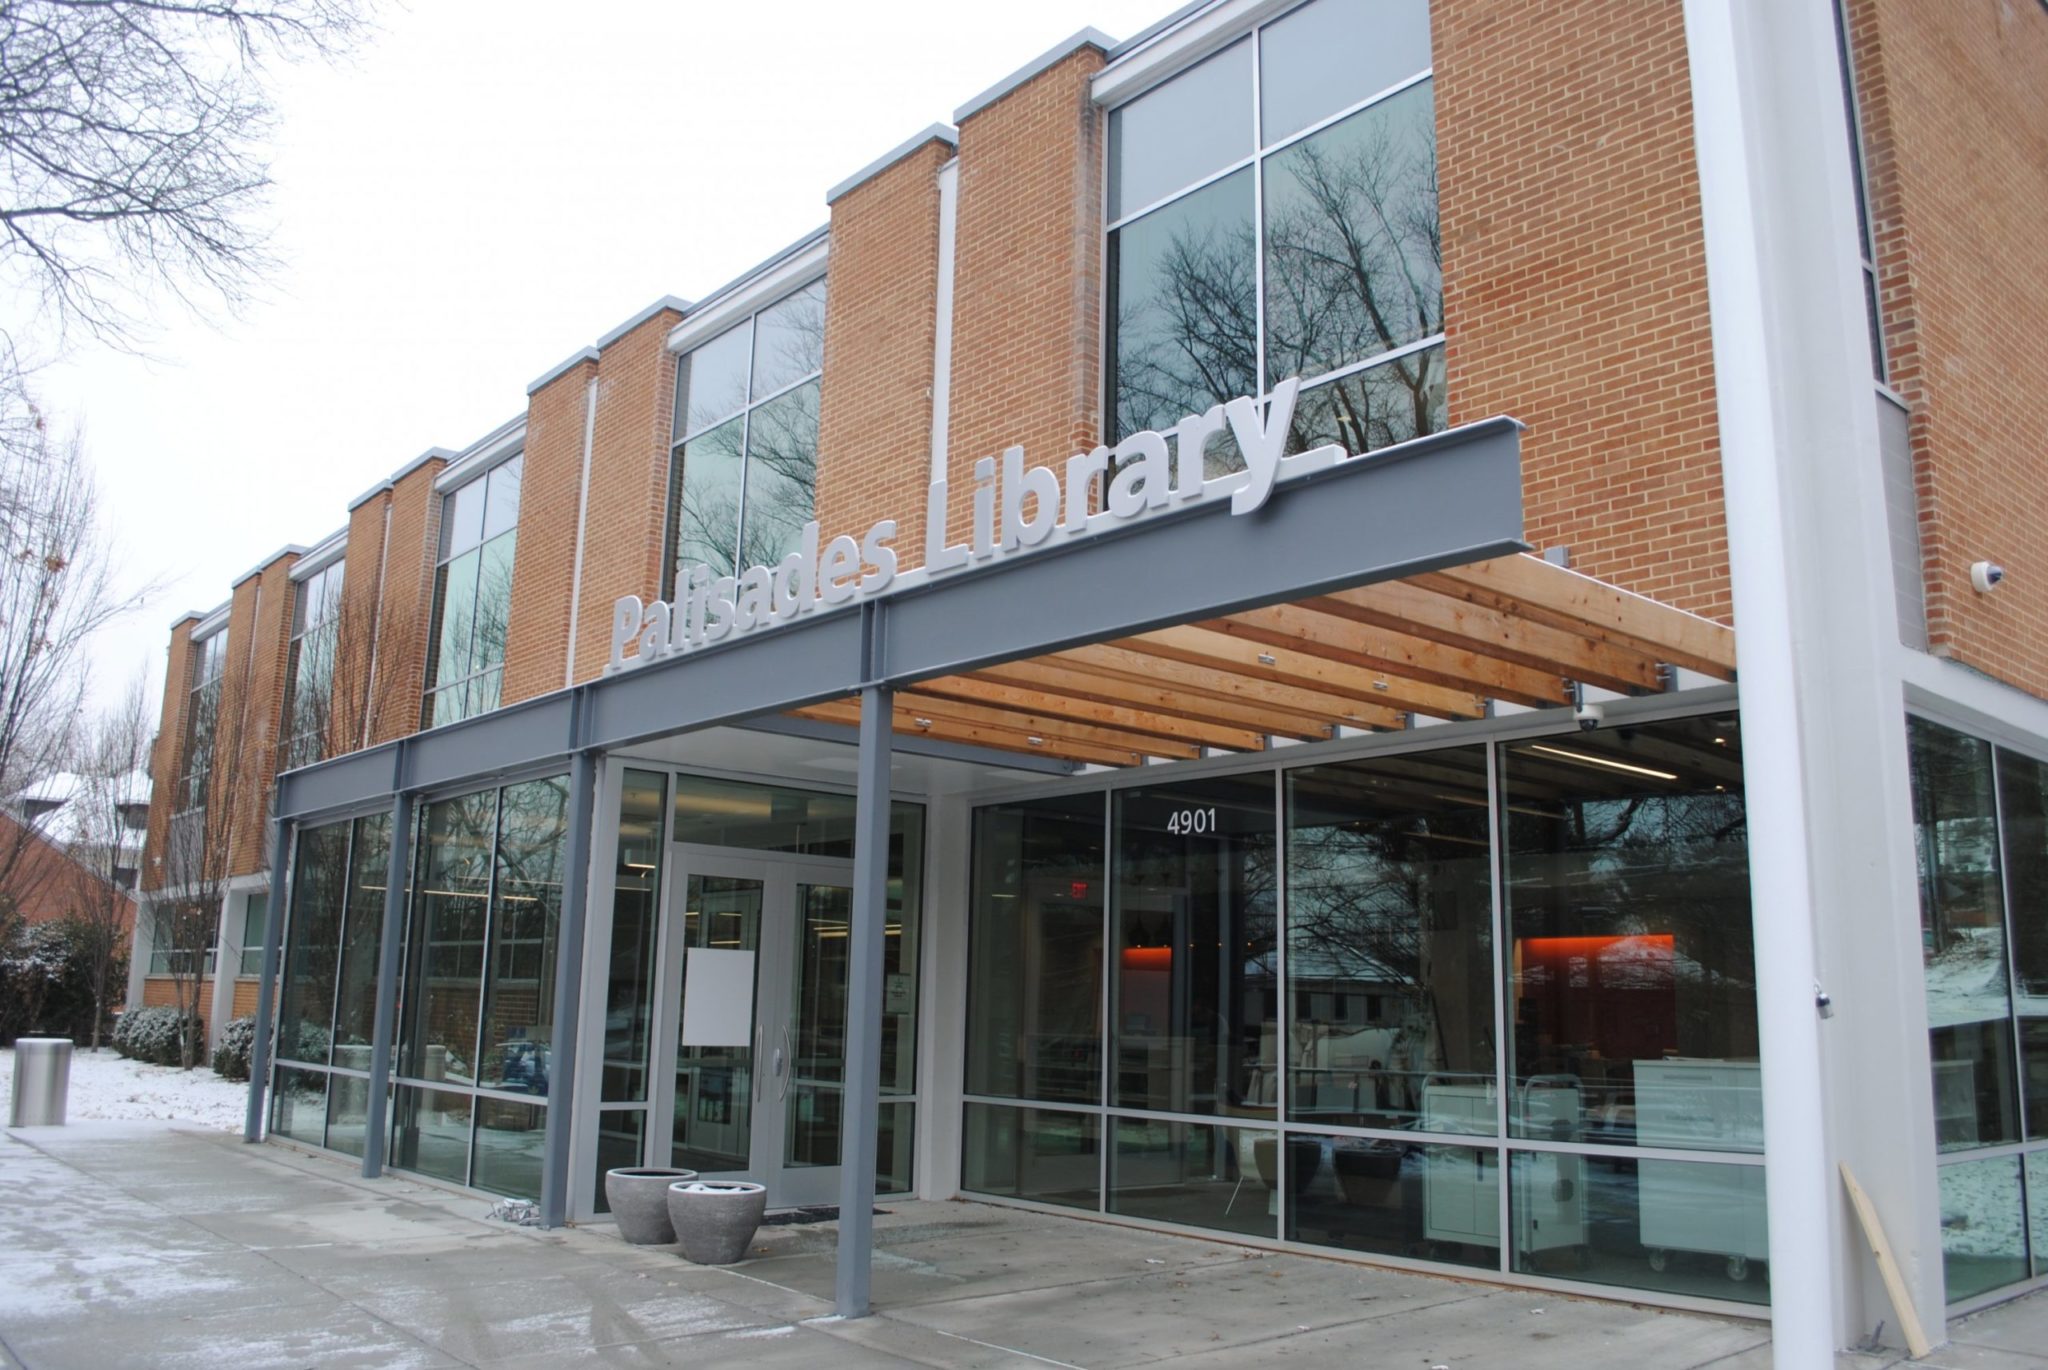 PHOTOS: DC’s Renovated Palisades Library Will Reopen This Weekend